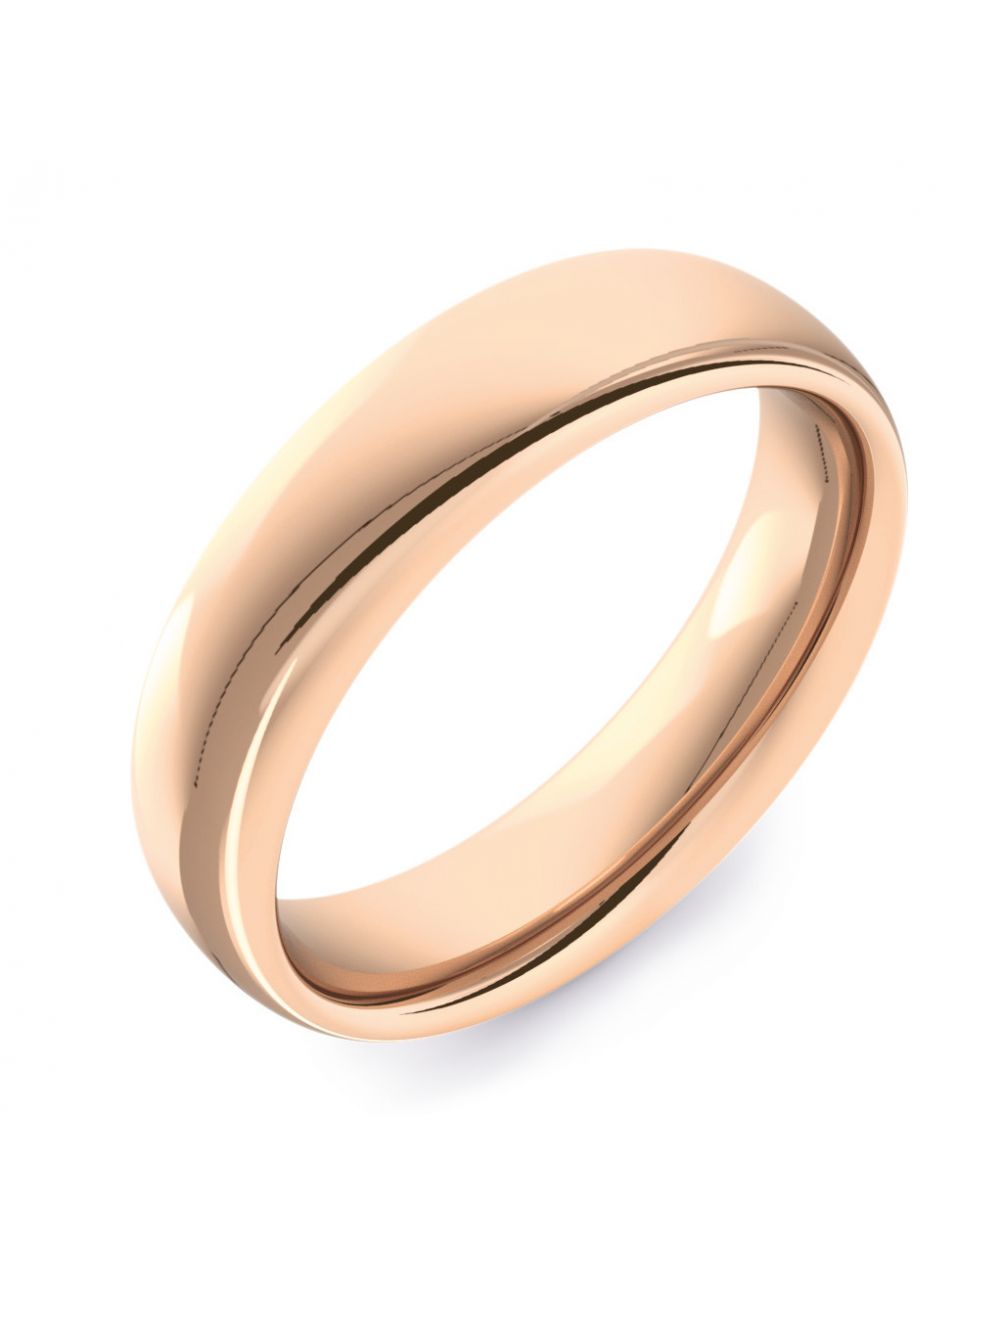 Hammered Simple Rose Gold Wedding Band | Ethical Jewelry – W.R. Metalarts